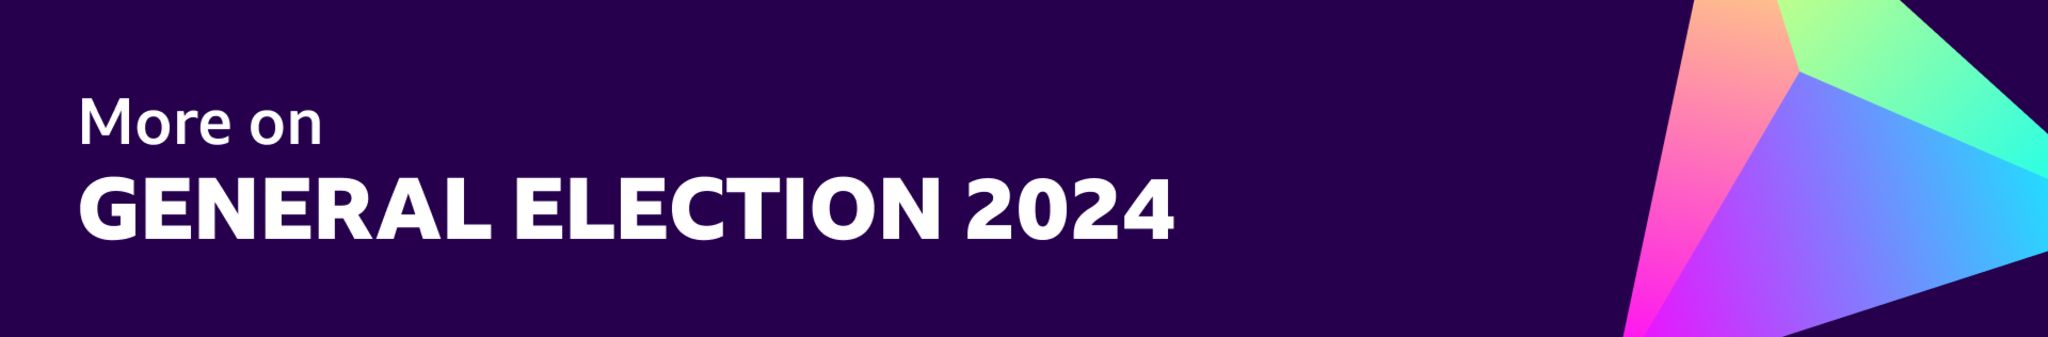 A banner image on a purple background with white text which says 'More on the general election 2024' 